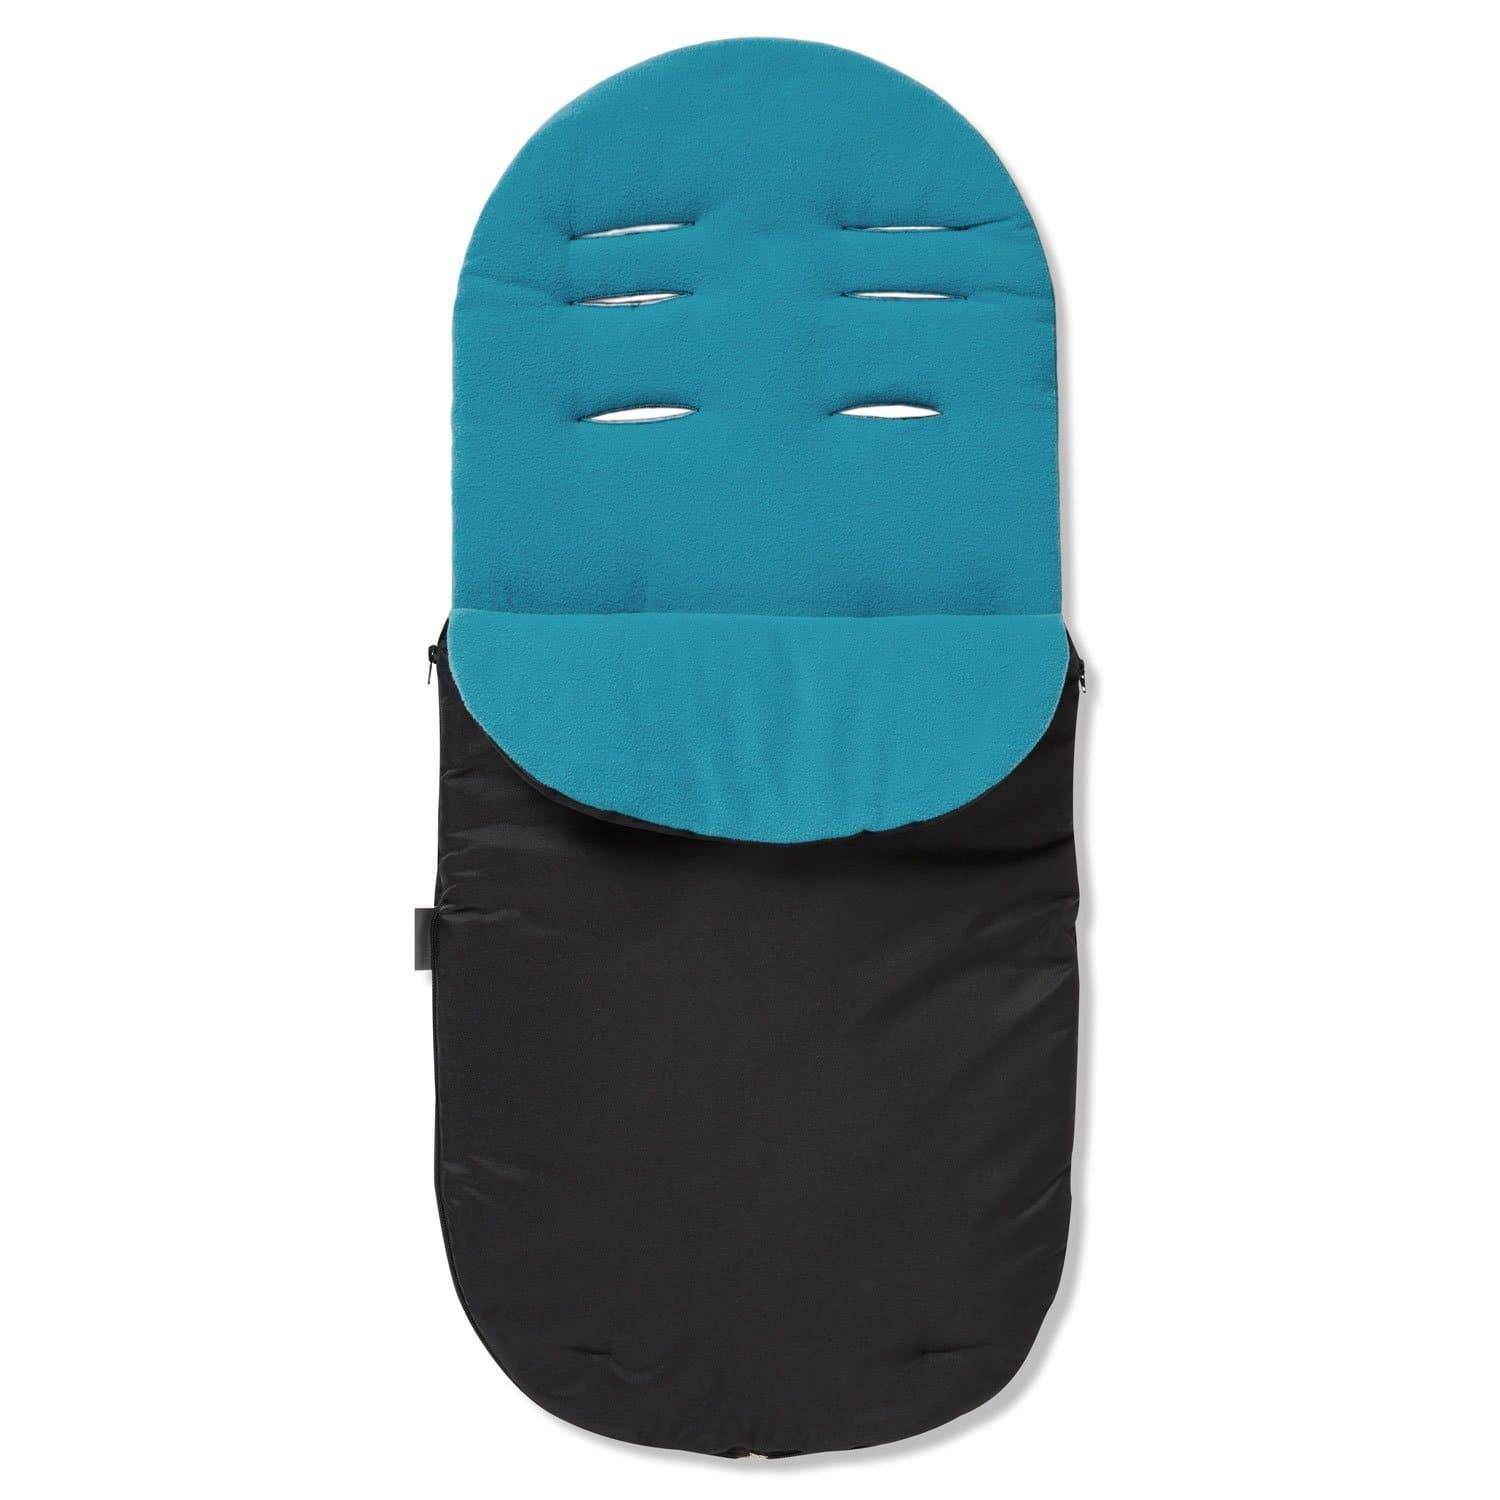 Footmuff / Cosy Toes Compatible with Quax - Turquoise / Fits All Models | For Your Little One